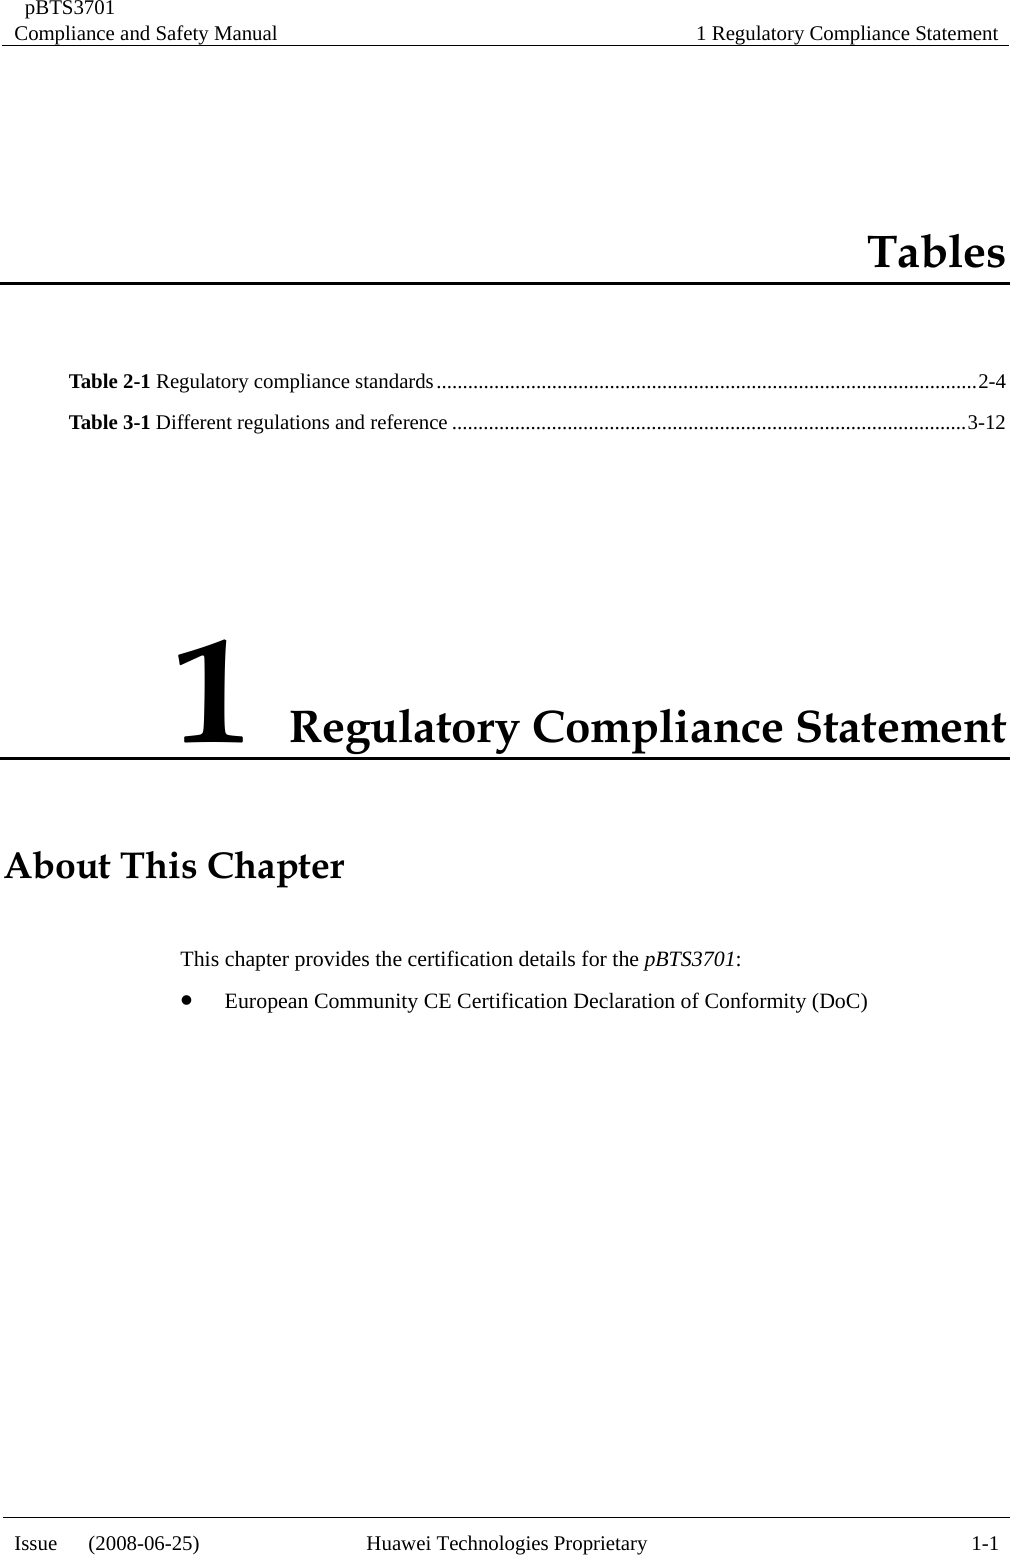  pBTS3701 Compliance and Safety Manual  1 Regulatory Compliance Statement Issue   (2008-06-25)  Huawei Technologies Proprietary  1-1Tables Table 2-1 Regulatory compliance standards.......................................................................................................2-4 Table 3-1 Different regulations and reference ..................................................................................................3-12 1 Regulatory Compliance Statement About ThiThis chapter provides the certification details for the pBTS3701: z European Community CE Certification Declaration of Conformity (DoC) s Chapter  